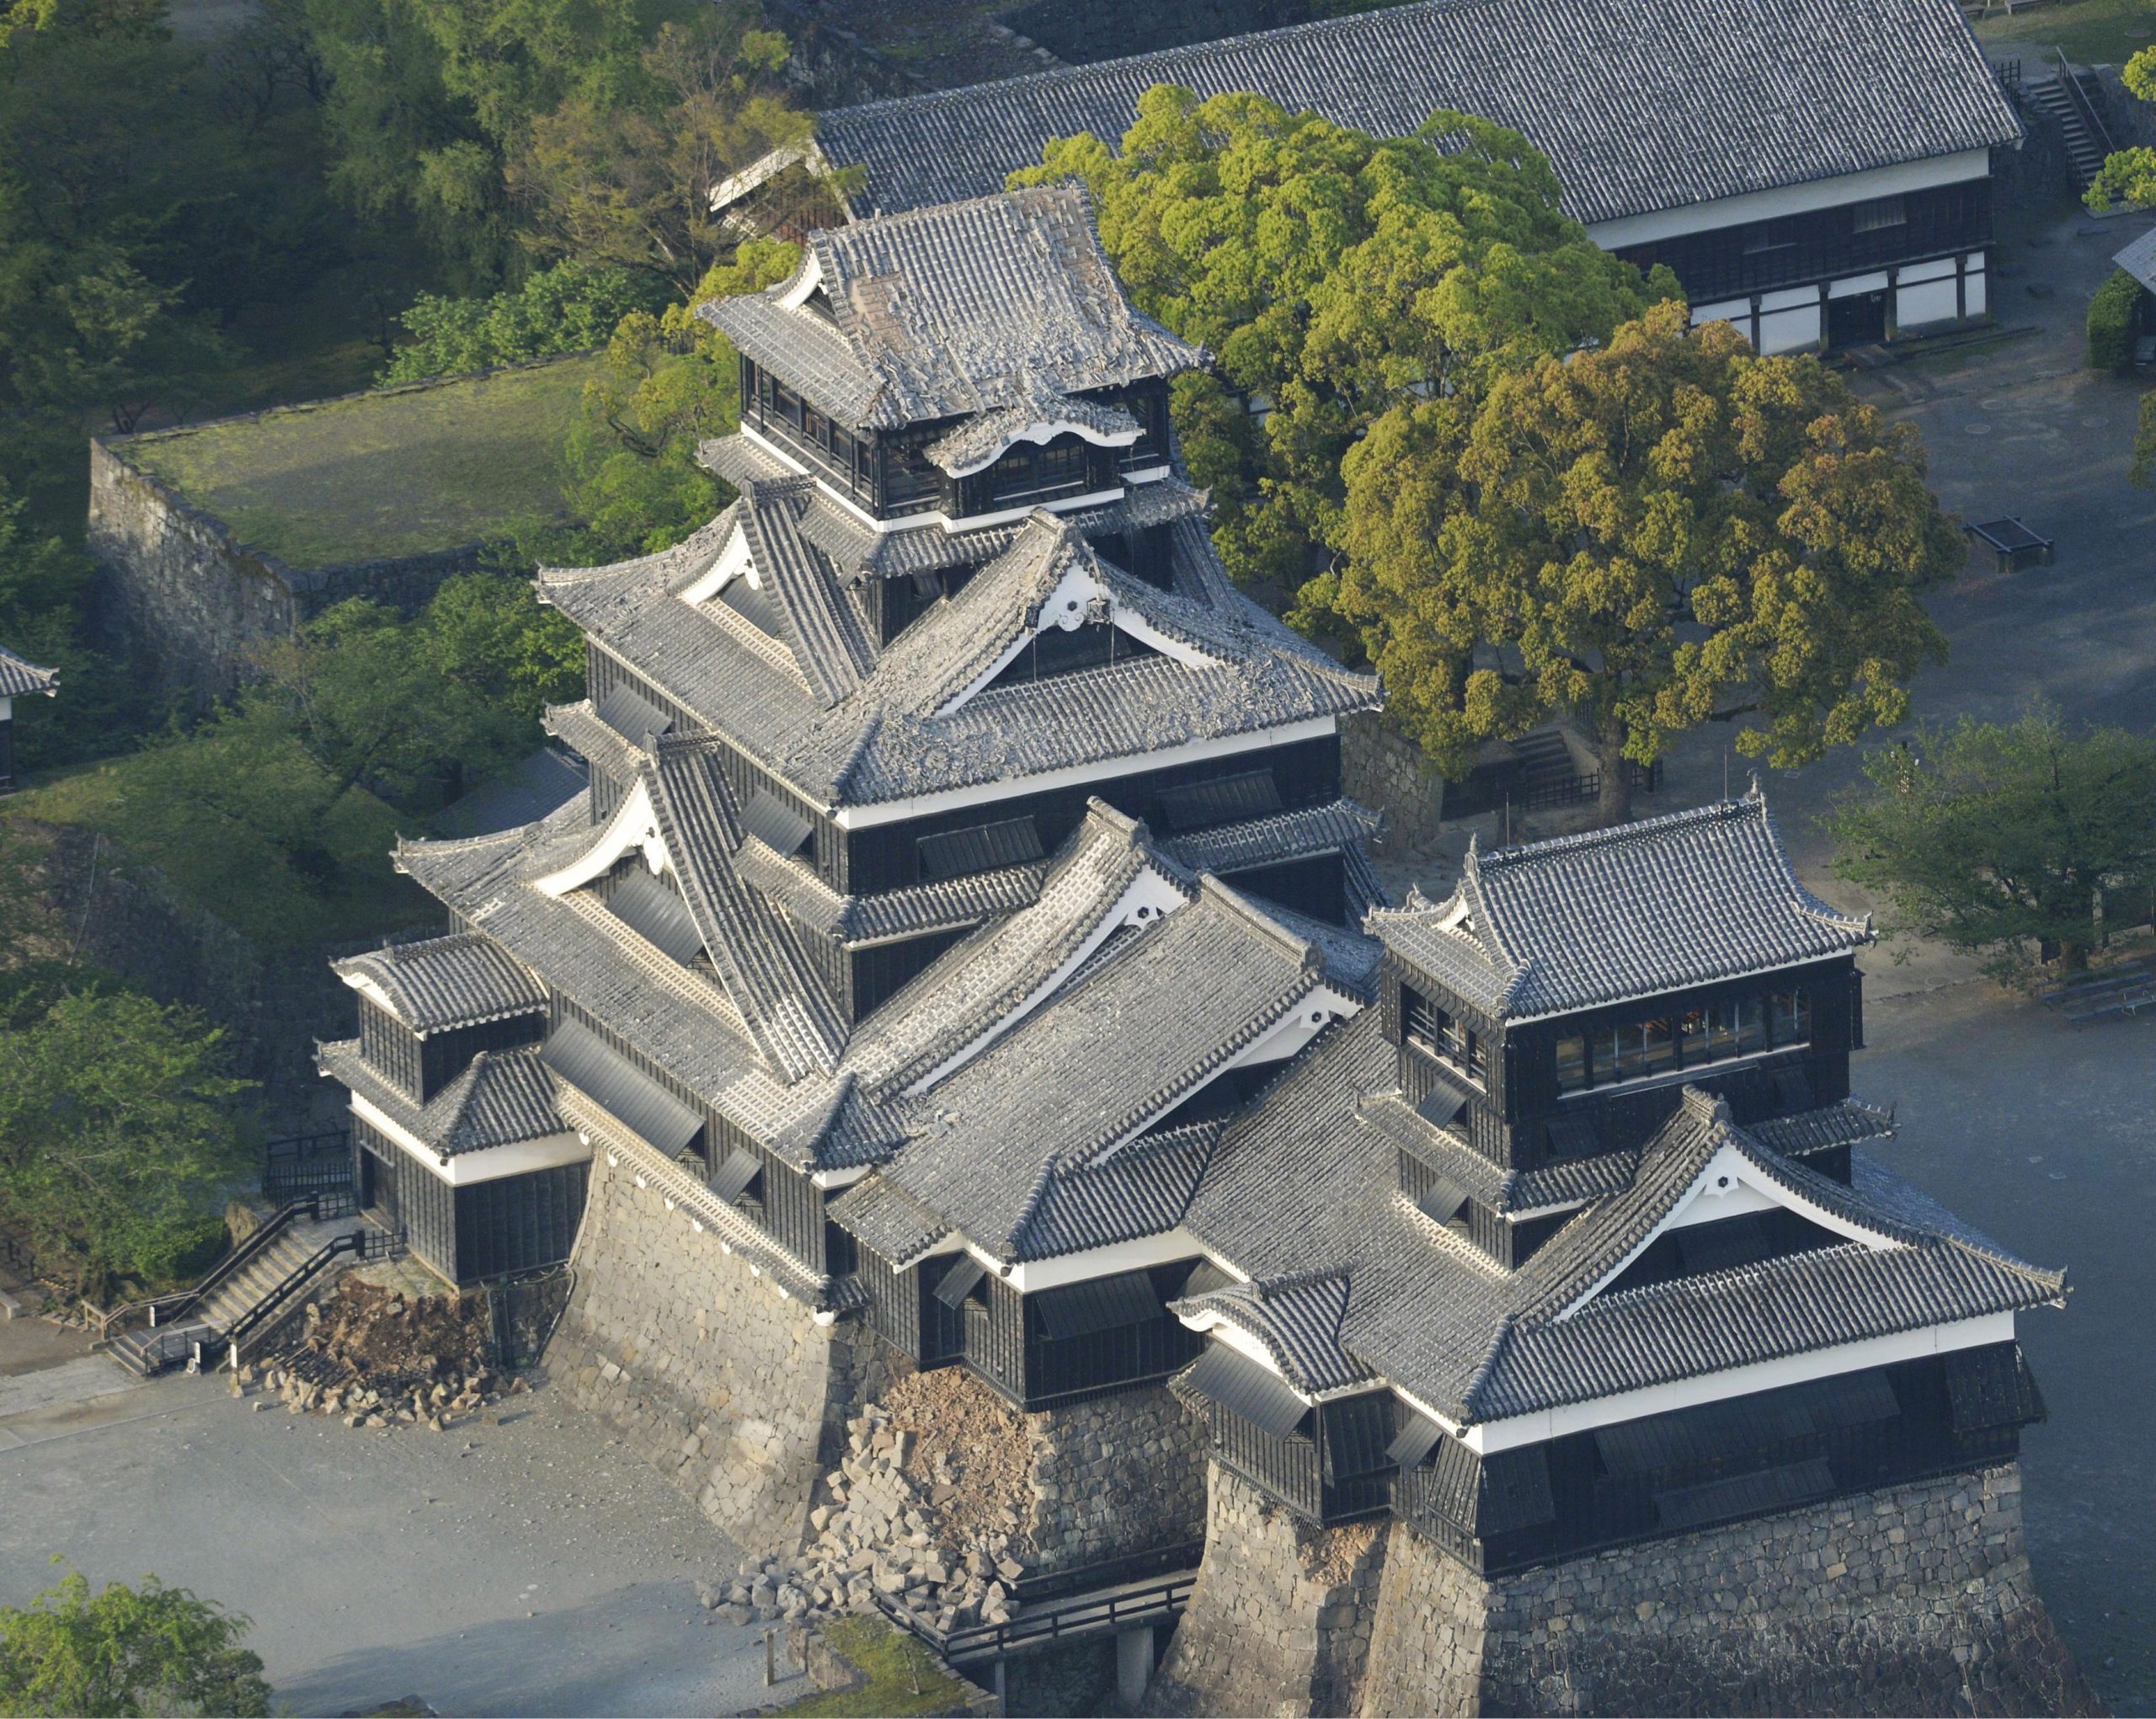 Damage to Kumamoto Castle caused by an earthquake is seen in Kumamoto, southern Japan